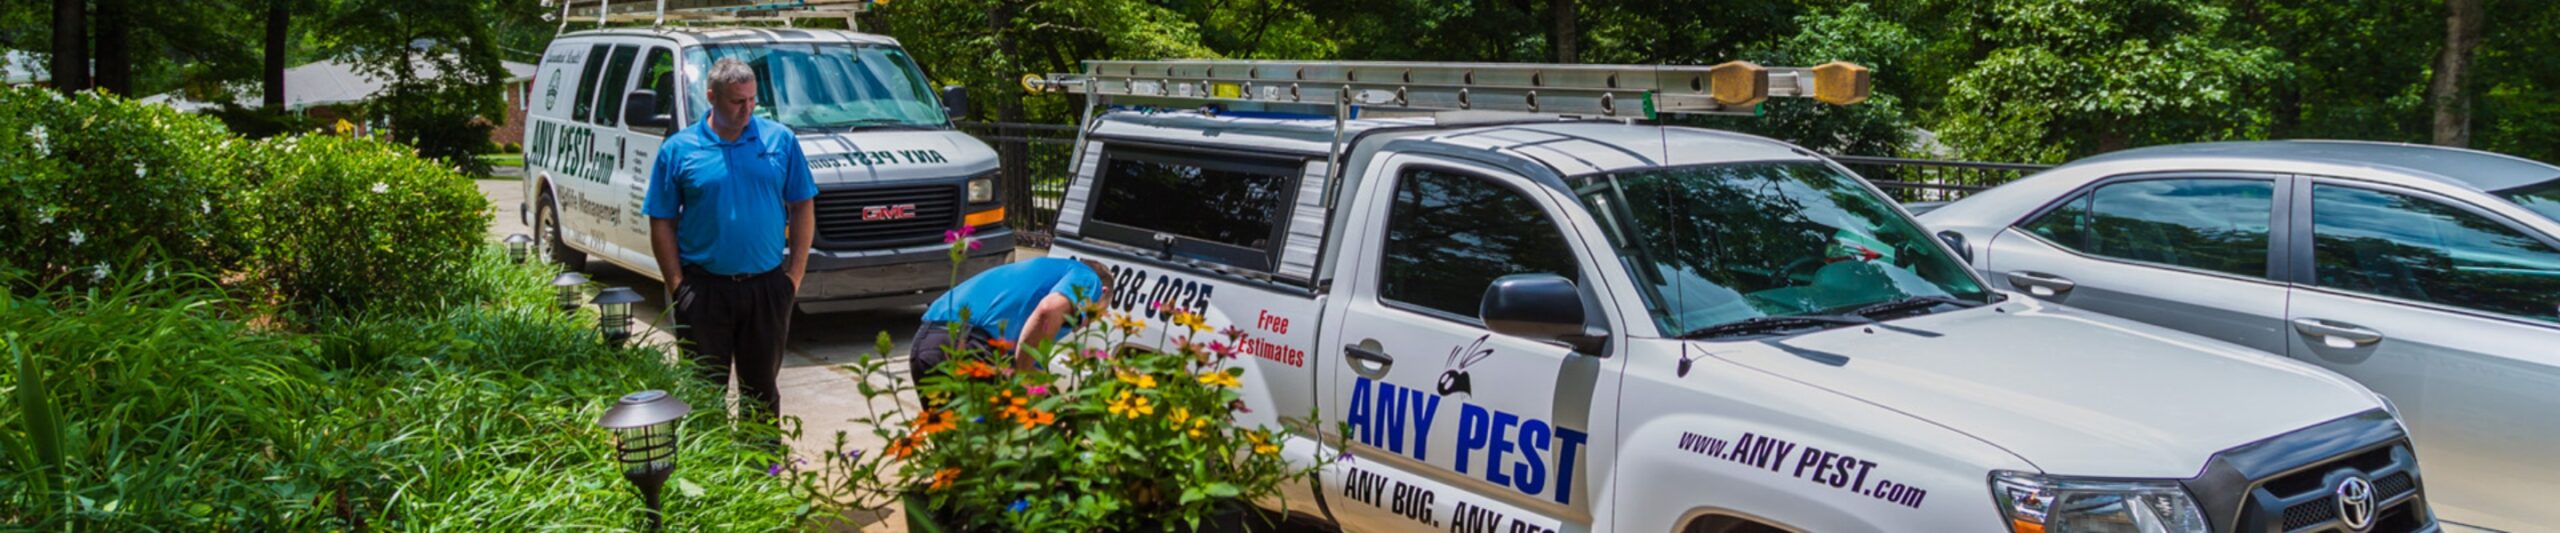 Customer Reviews for Any Pest | Any Pest Inc